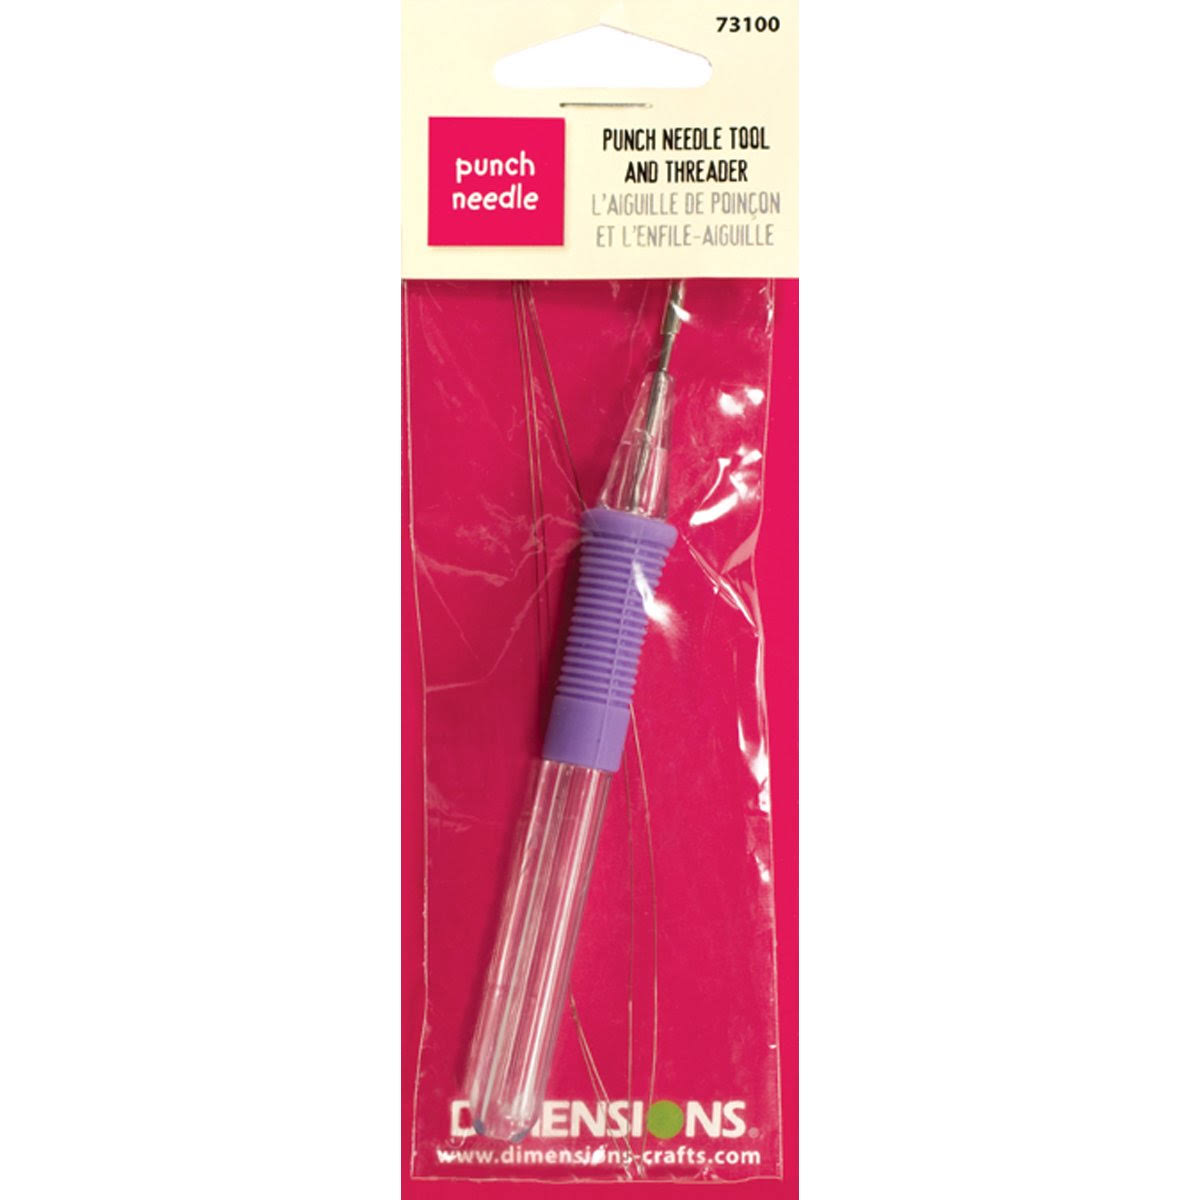 Dimensions Punch Needle Tool and Threader - 5"